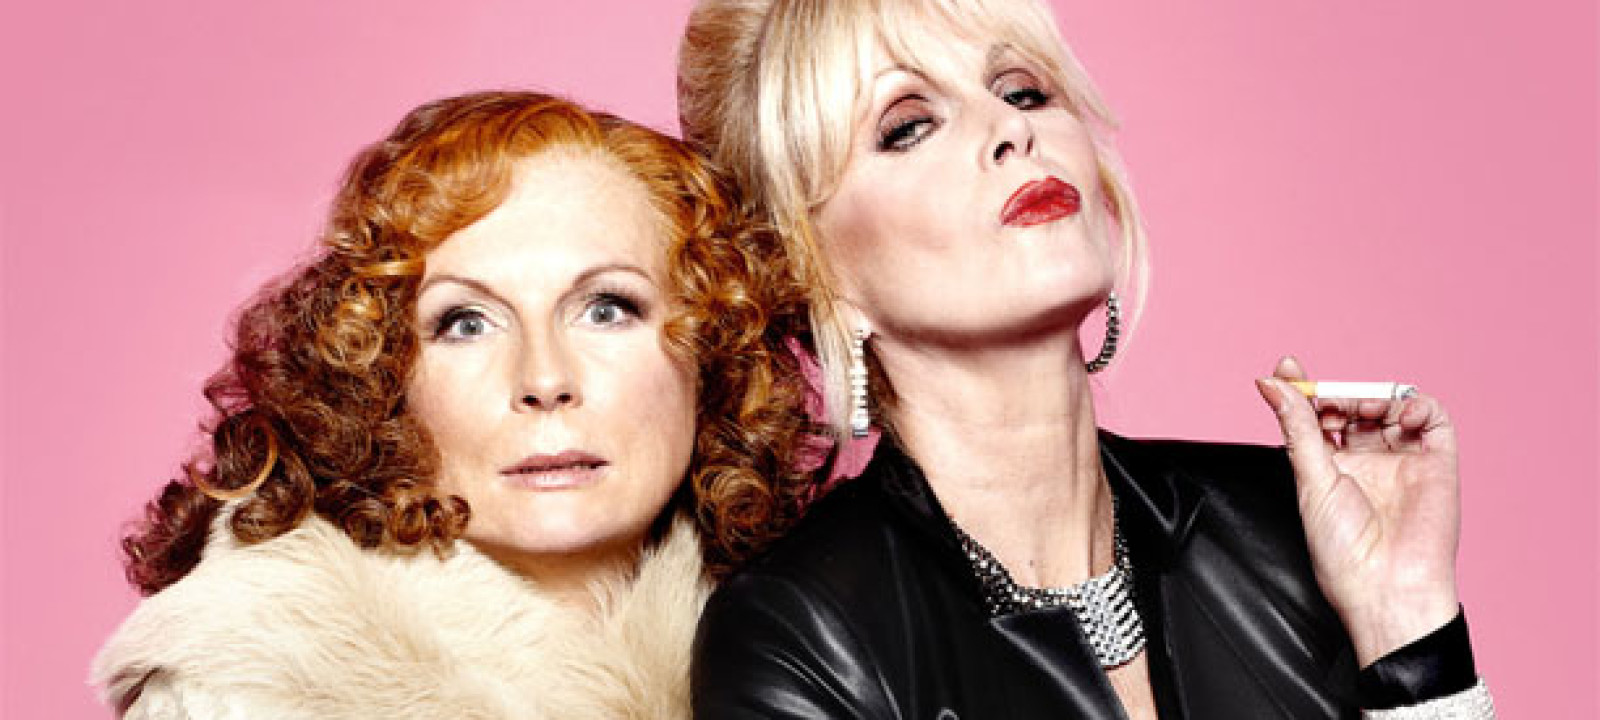 Absolutely Fabulous Backgrounds, Compatible - PC, Mobile, Gadgets| 1600x720 px